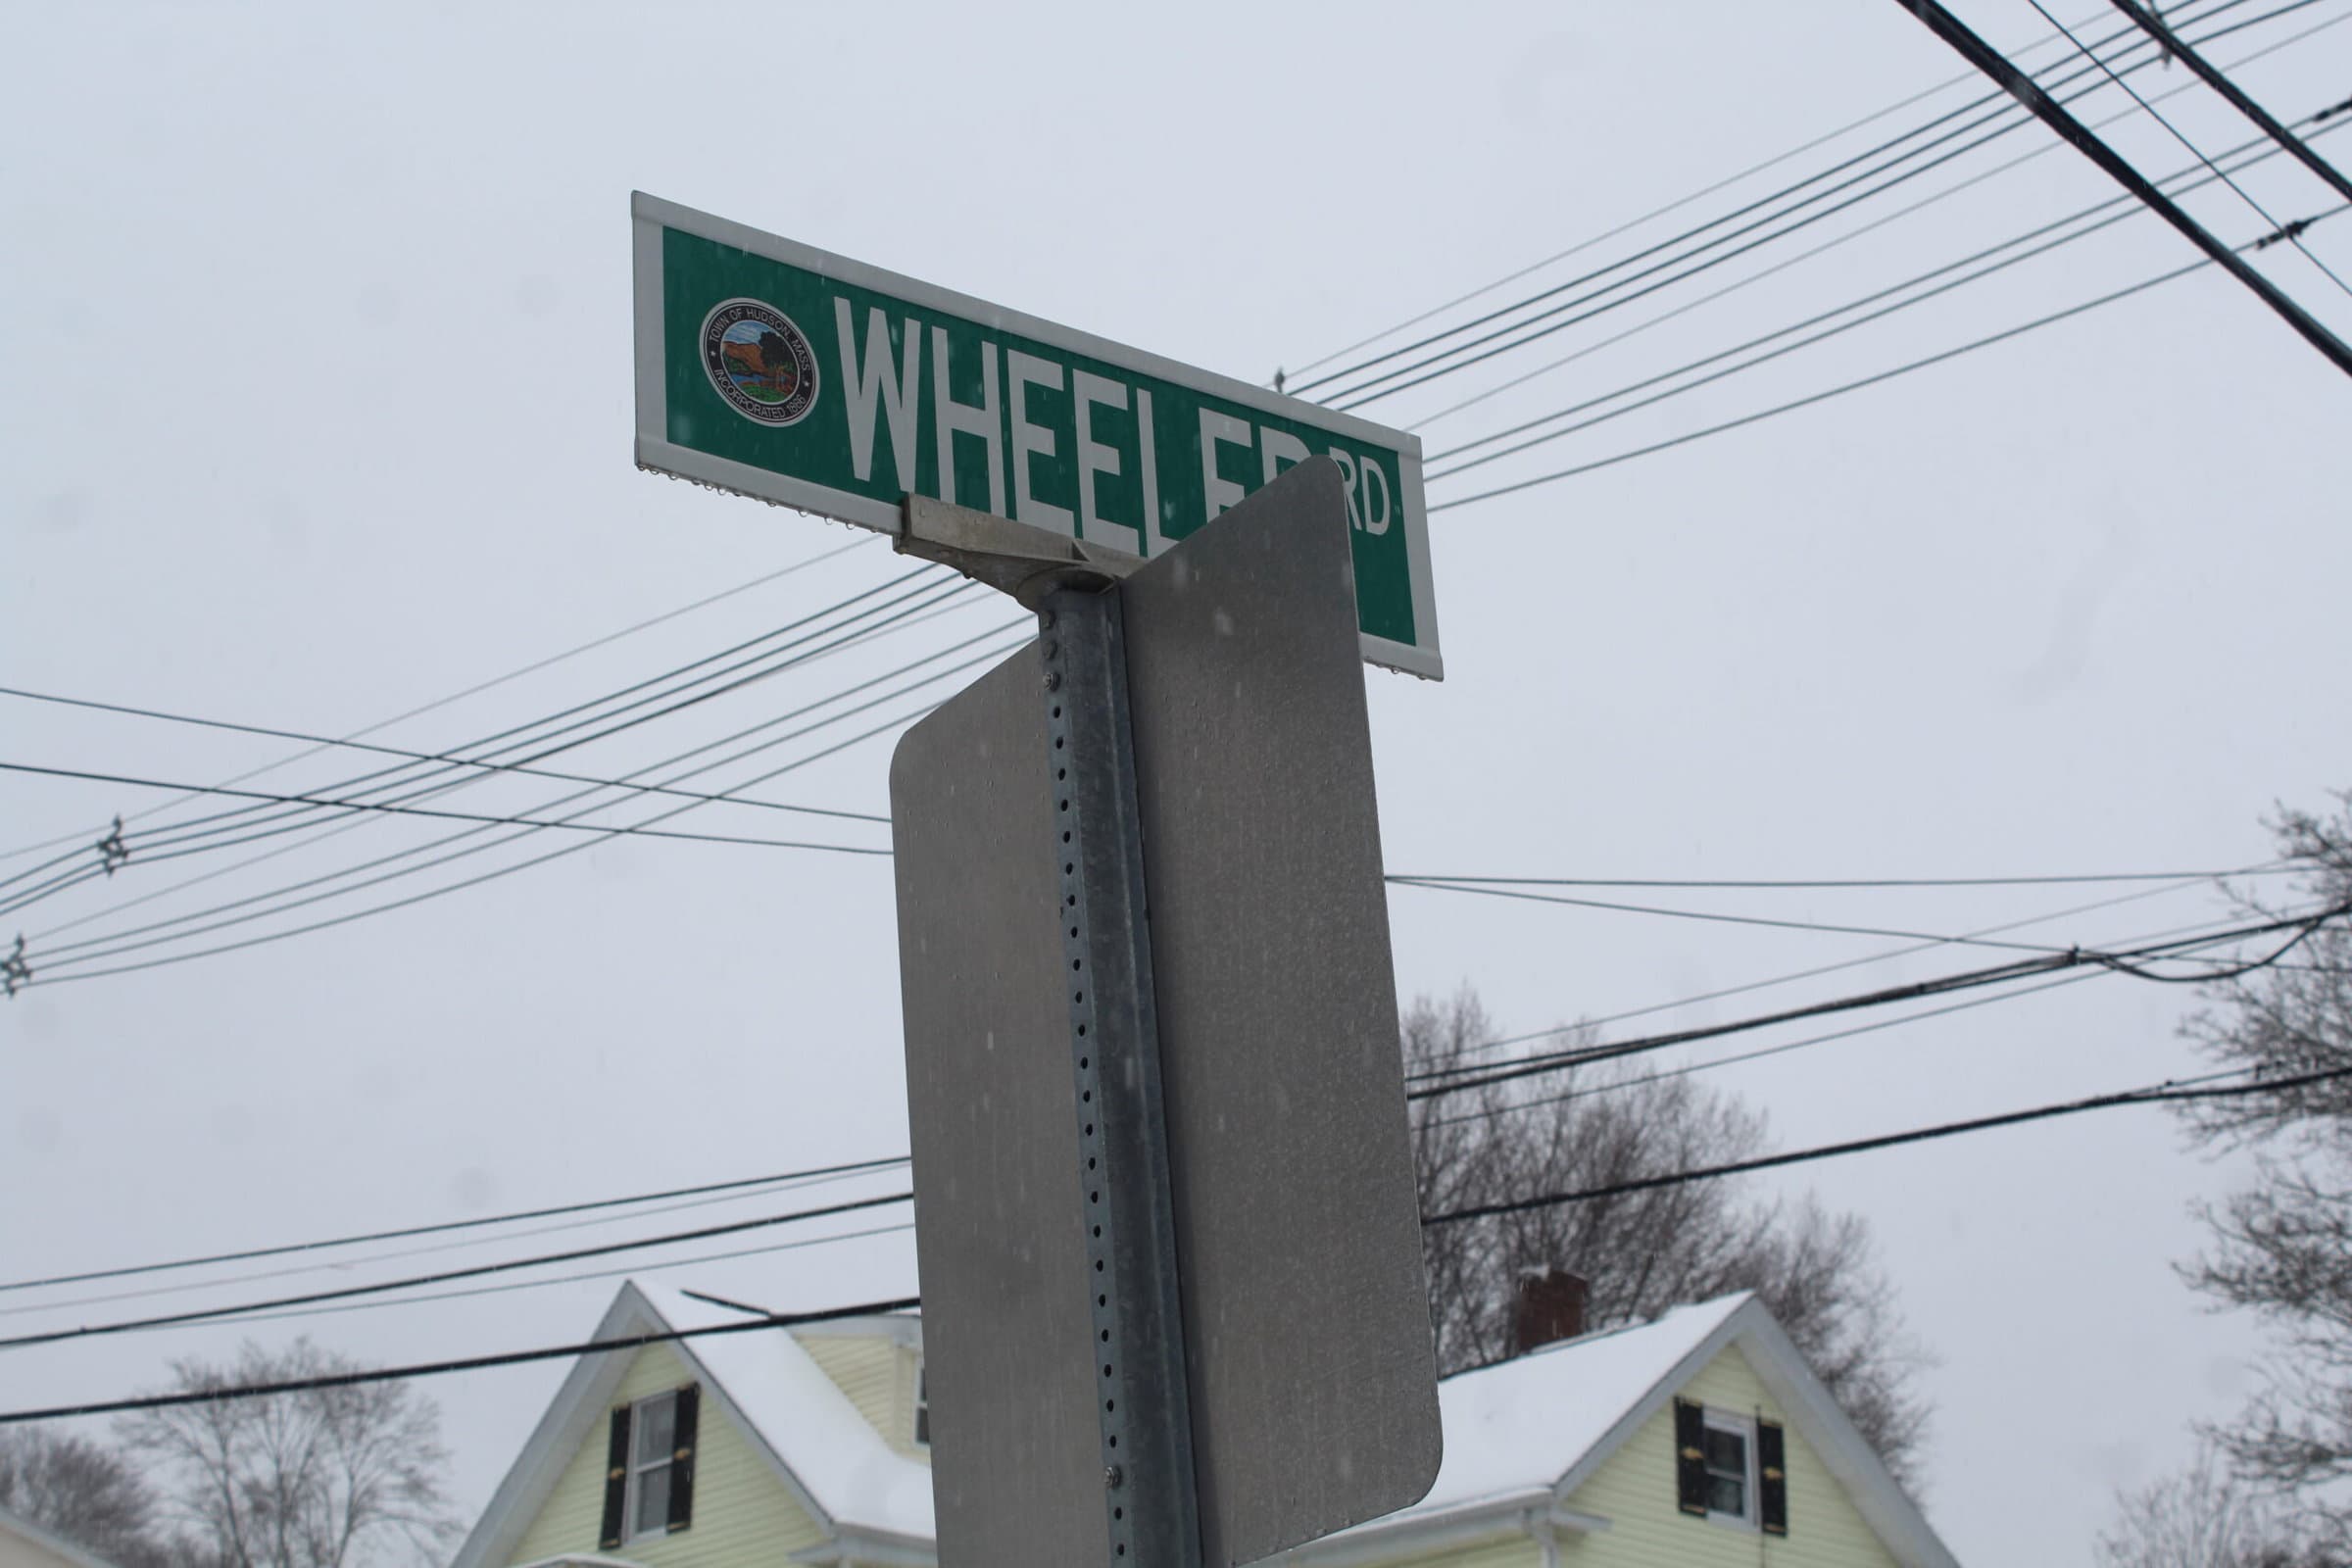 Internal Traffic Committee recommends making Wheeler Rd. one-way